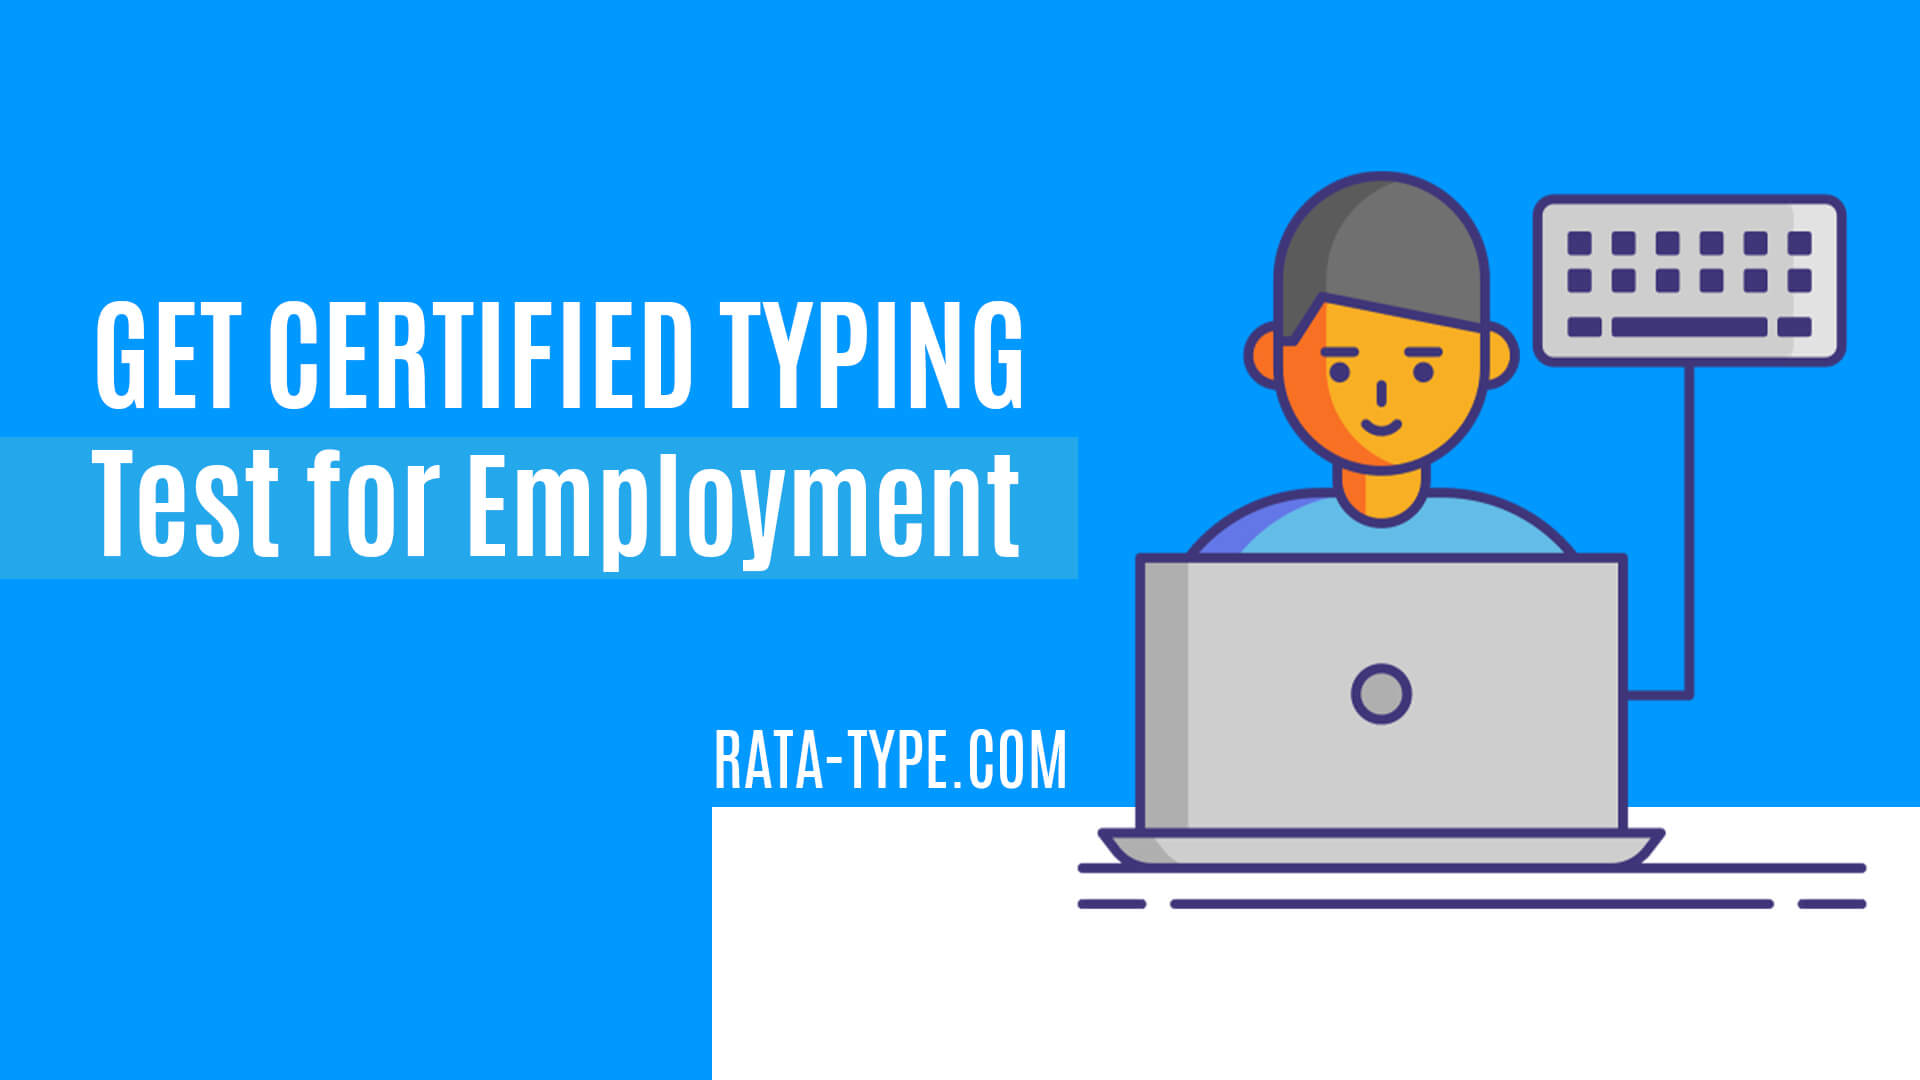 Get Certified Typing Test for Employment